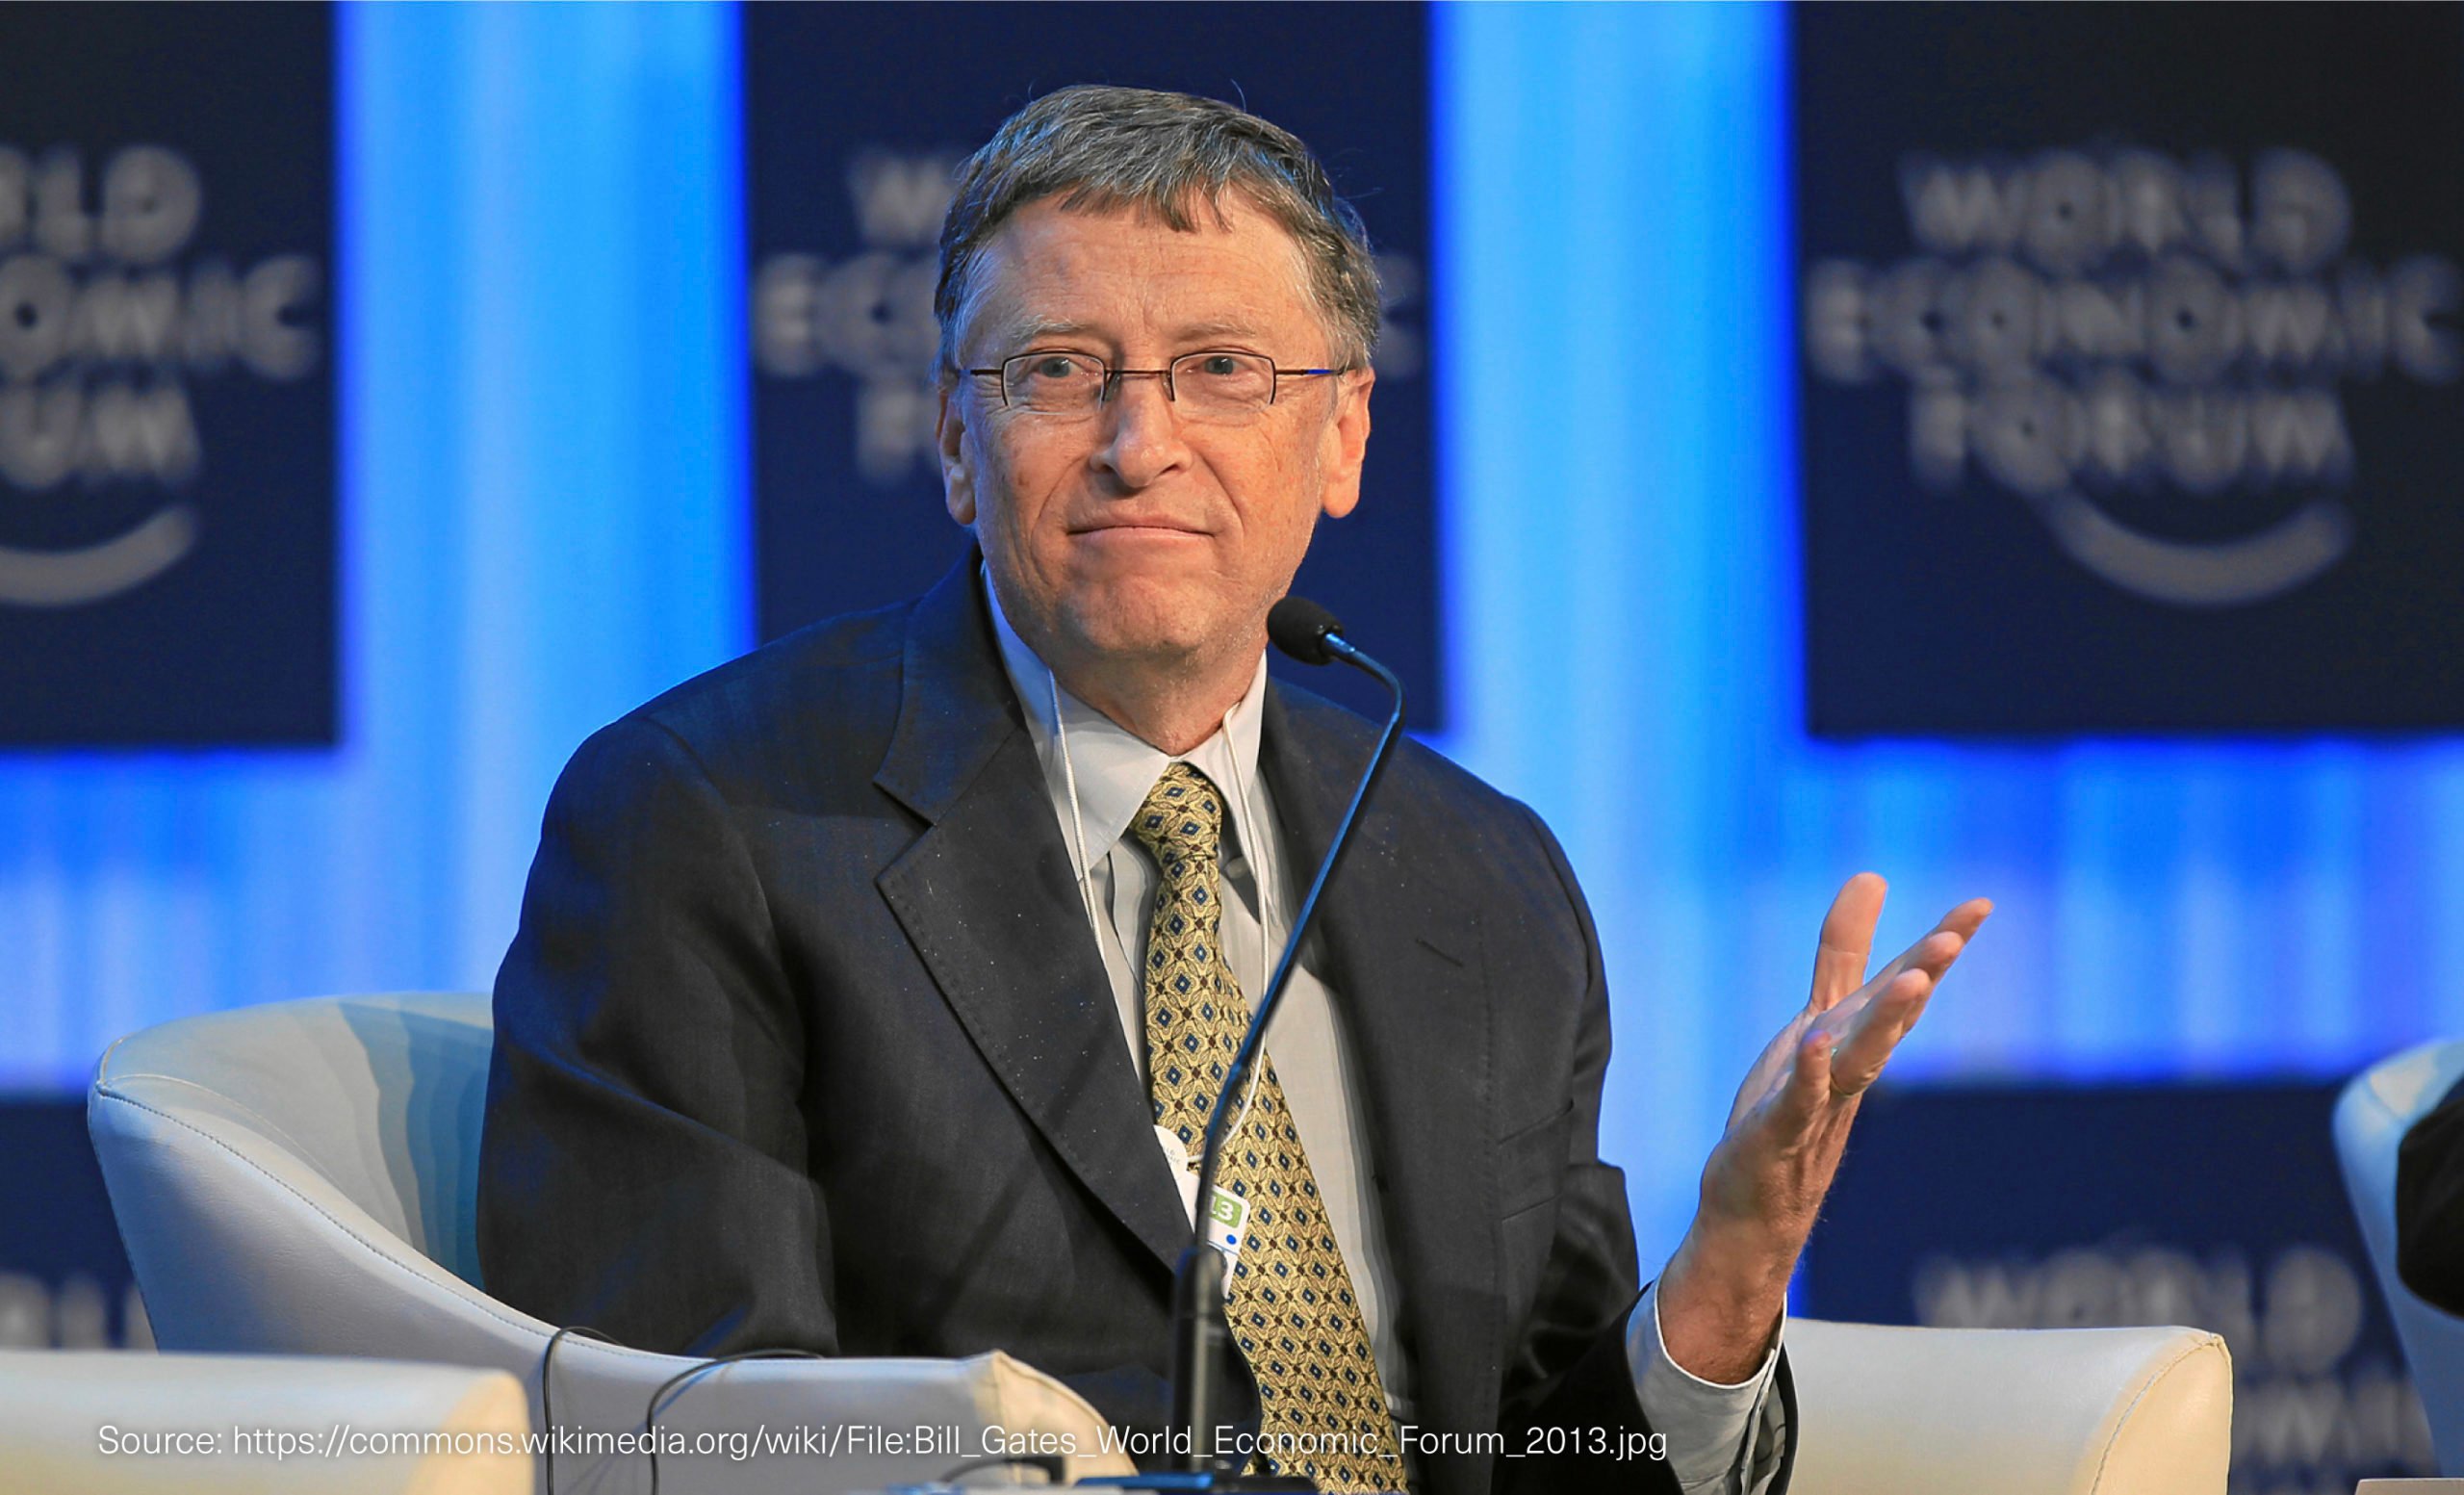 Bill Gates & the 10,000 Hour Rule